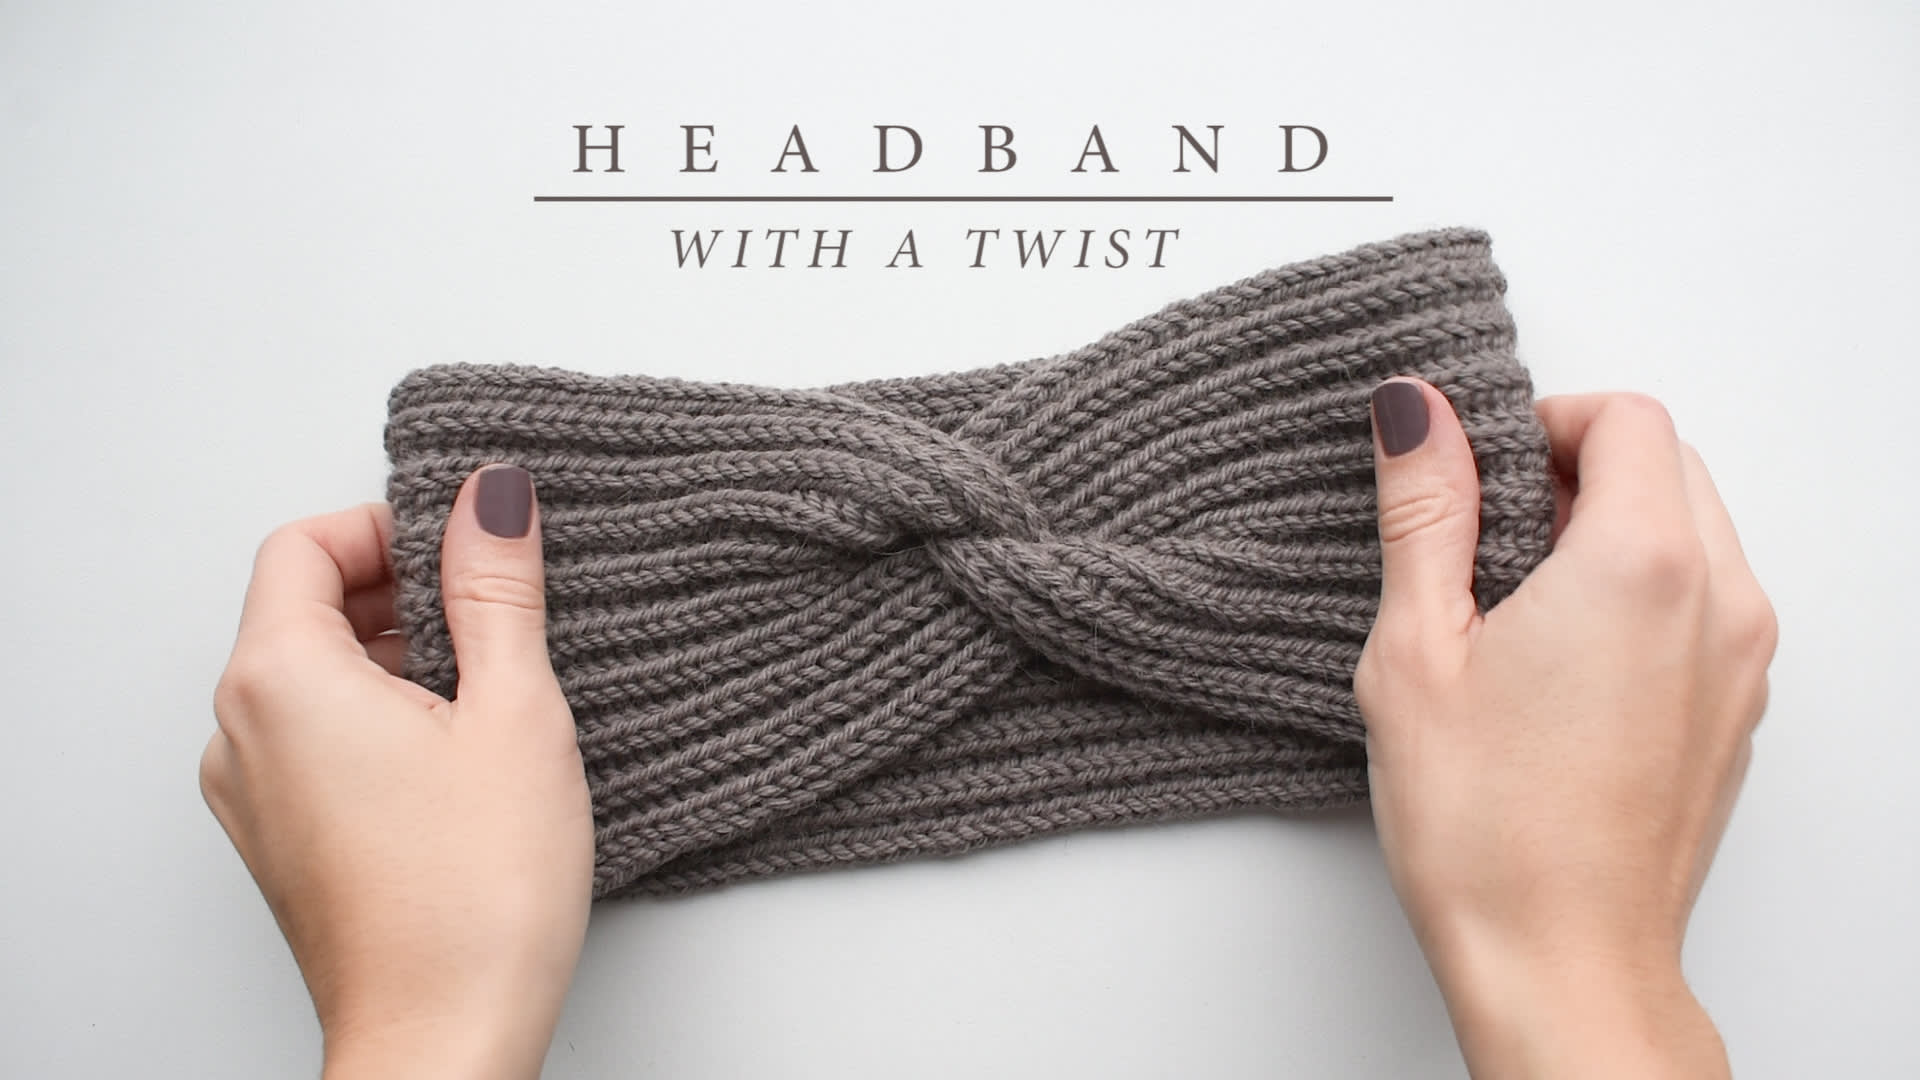 How to knit a headband with a twist | Knitting tutorial